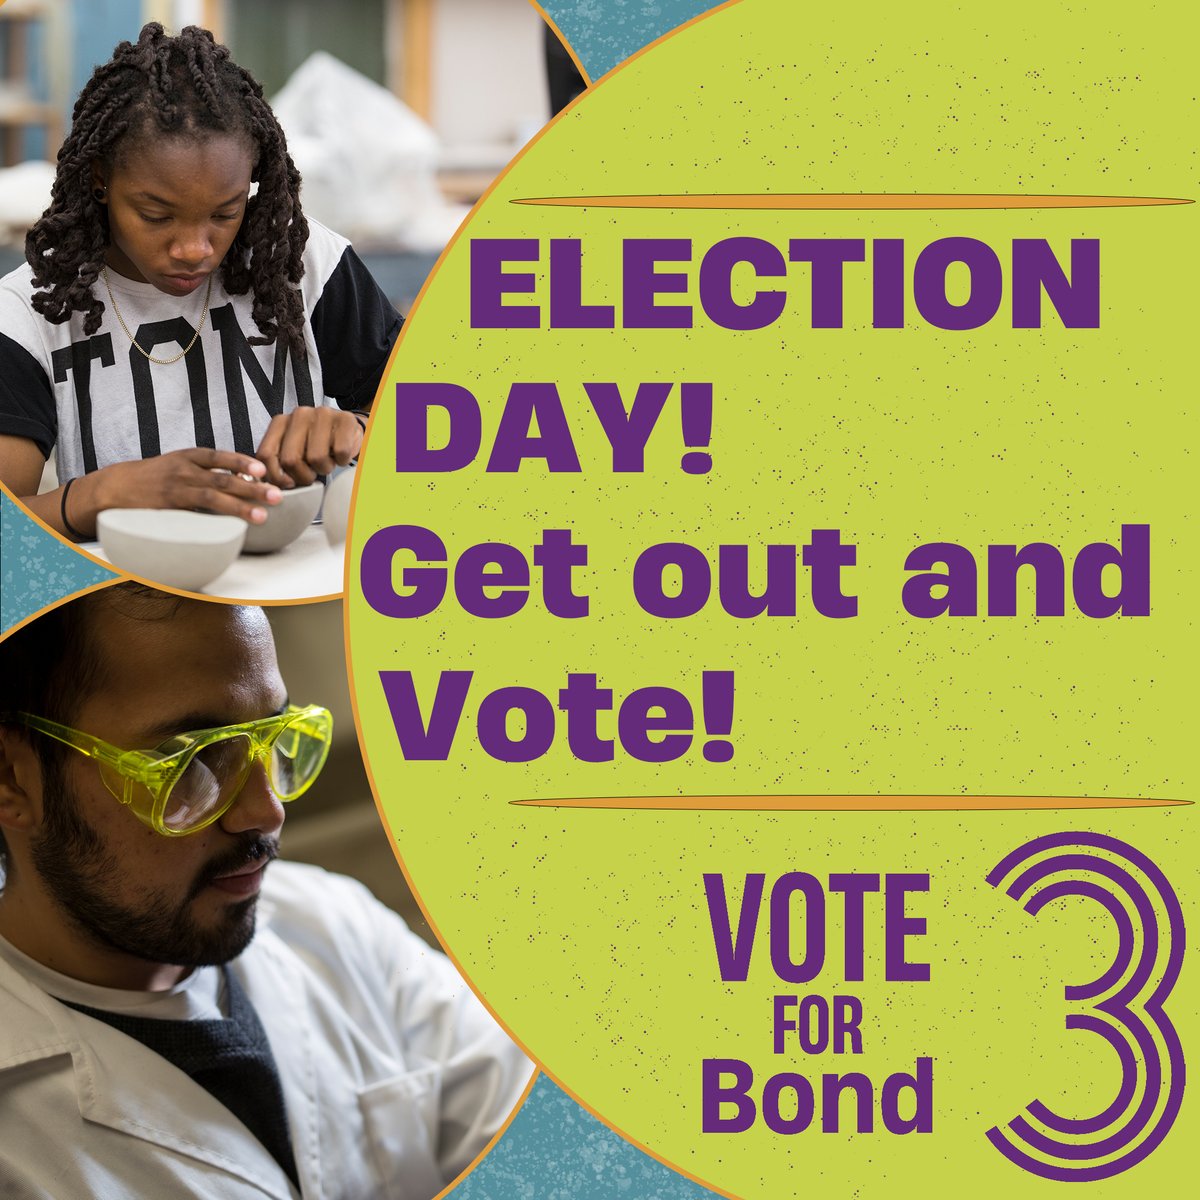 It's ELECTION DAY! Get out and vote to help uplift education in New Mexico, creating a better New Mexico for us all! #Bond3ForNM